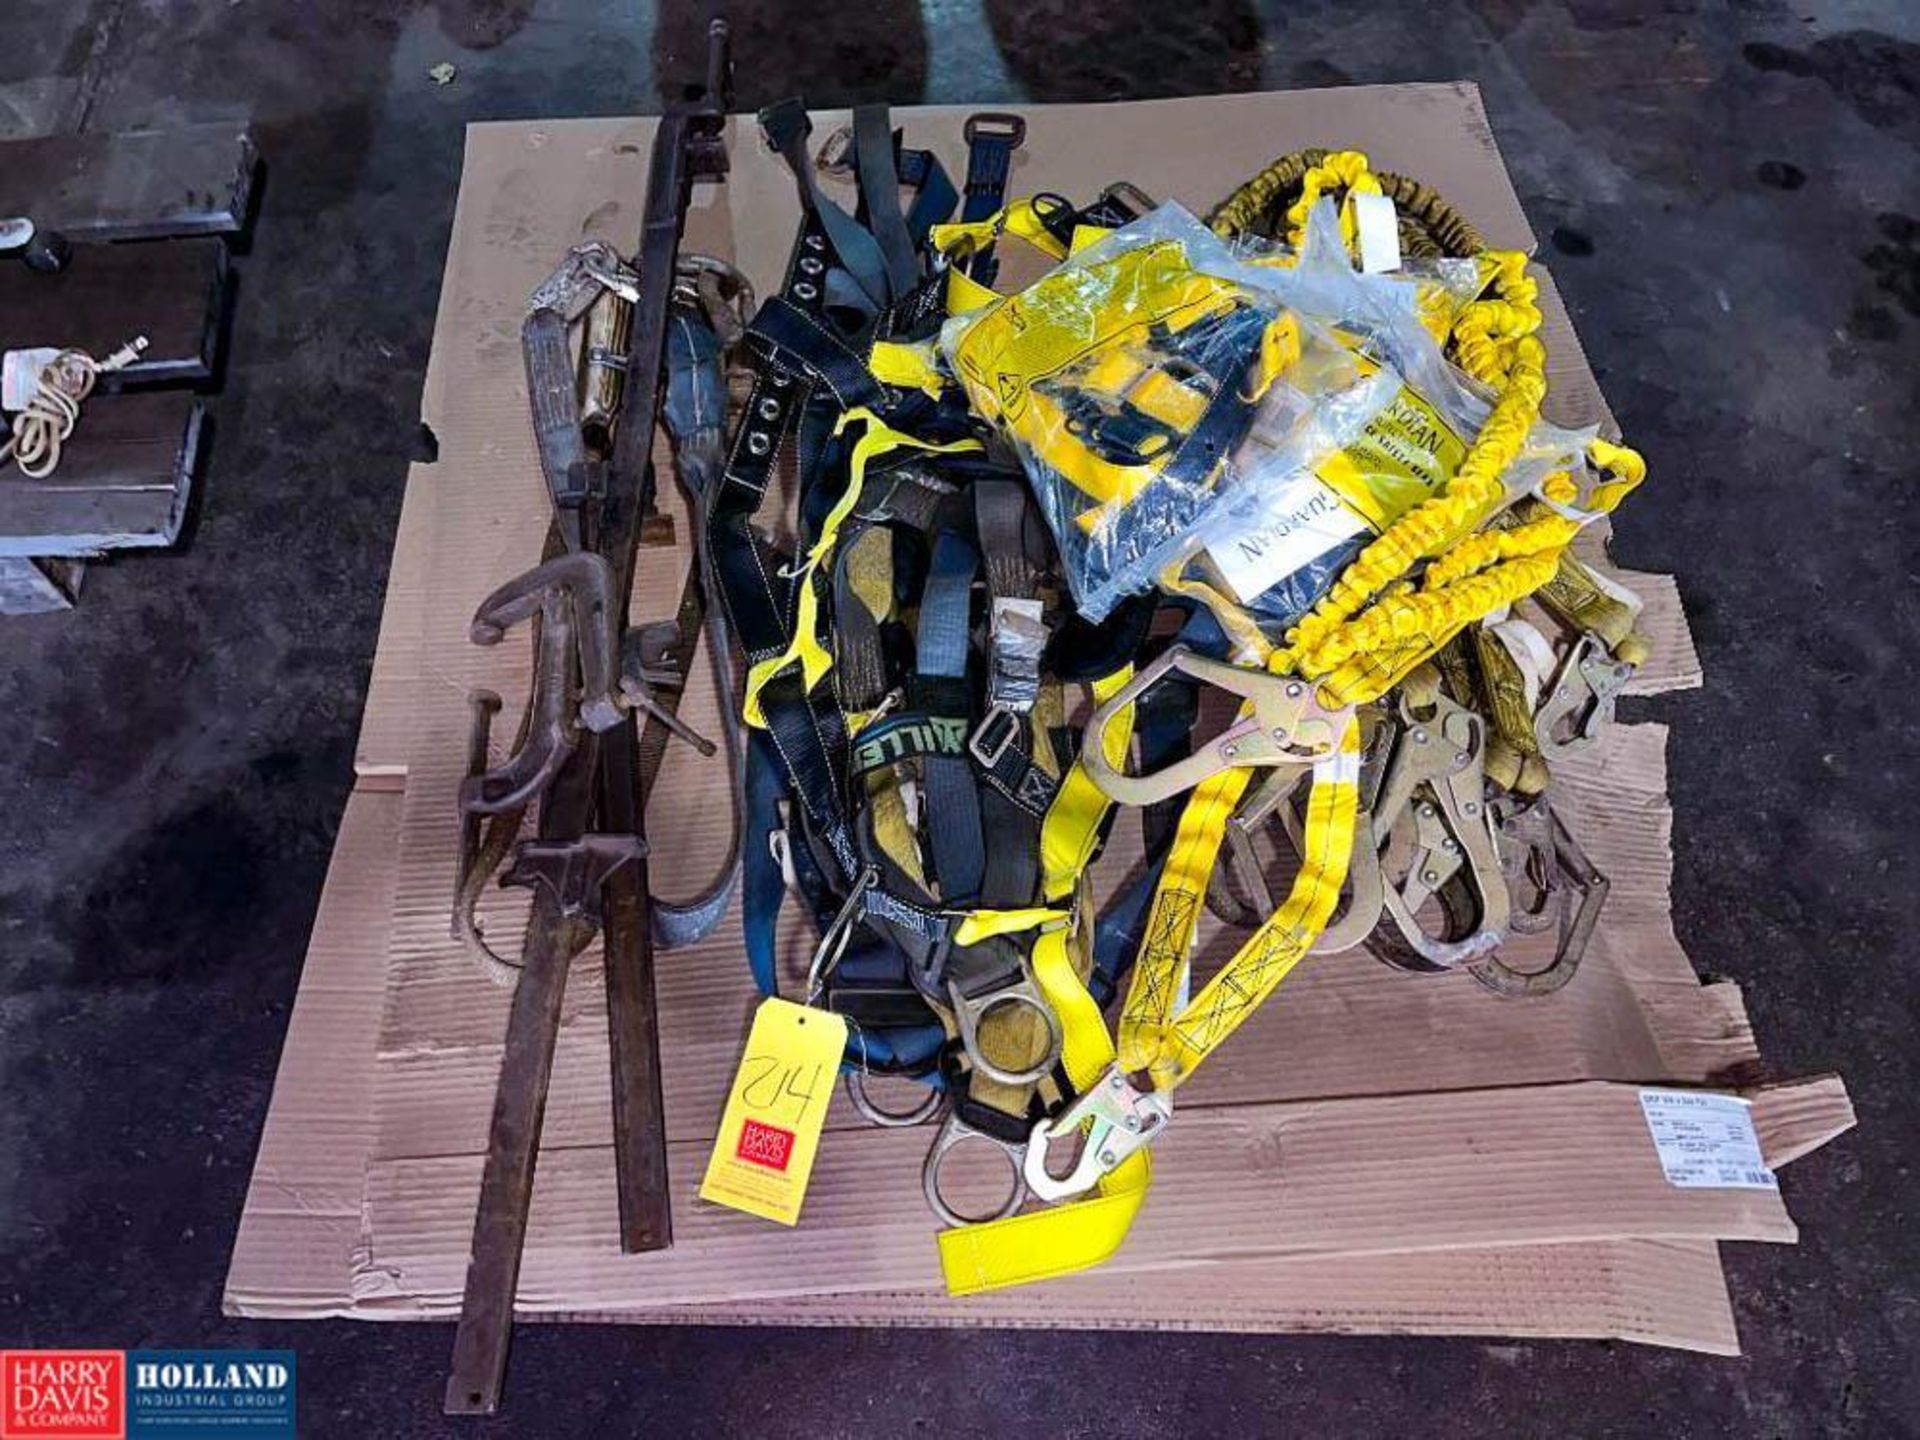 Assorted Harnesses, Lanyards and Clamps